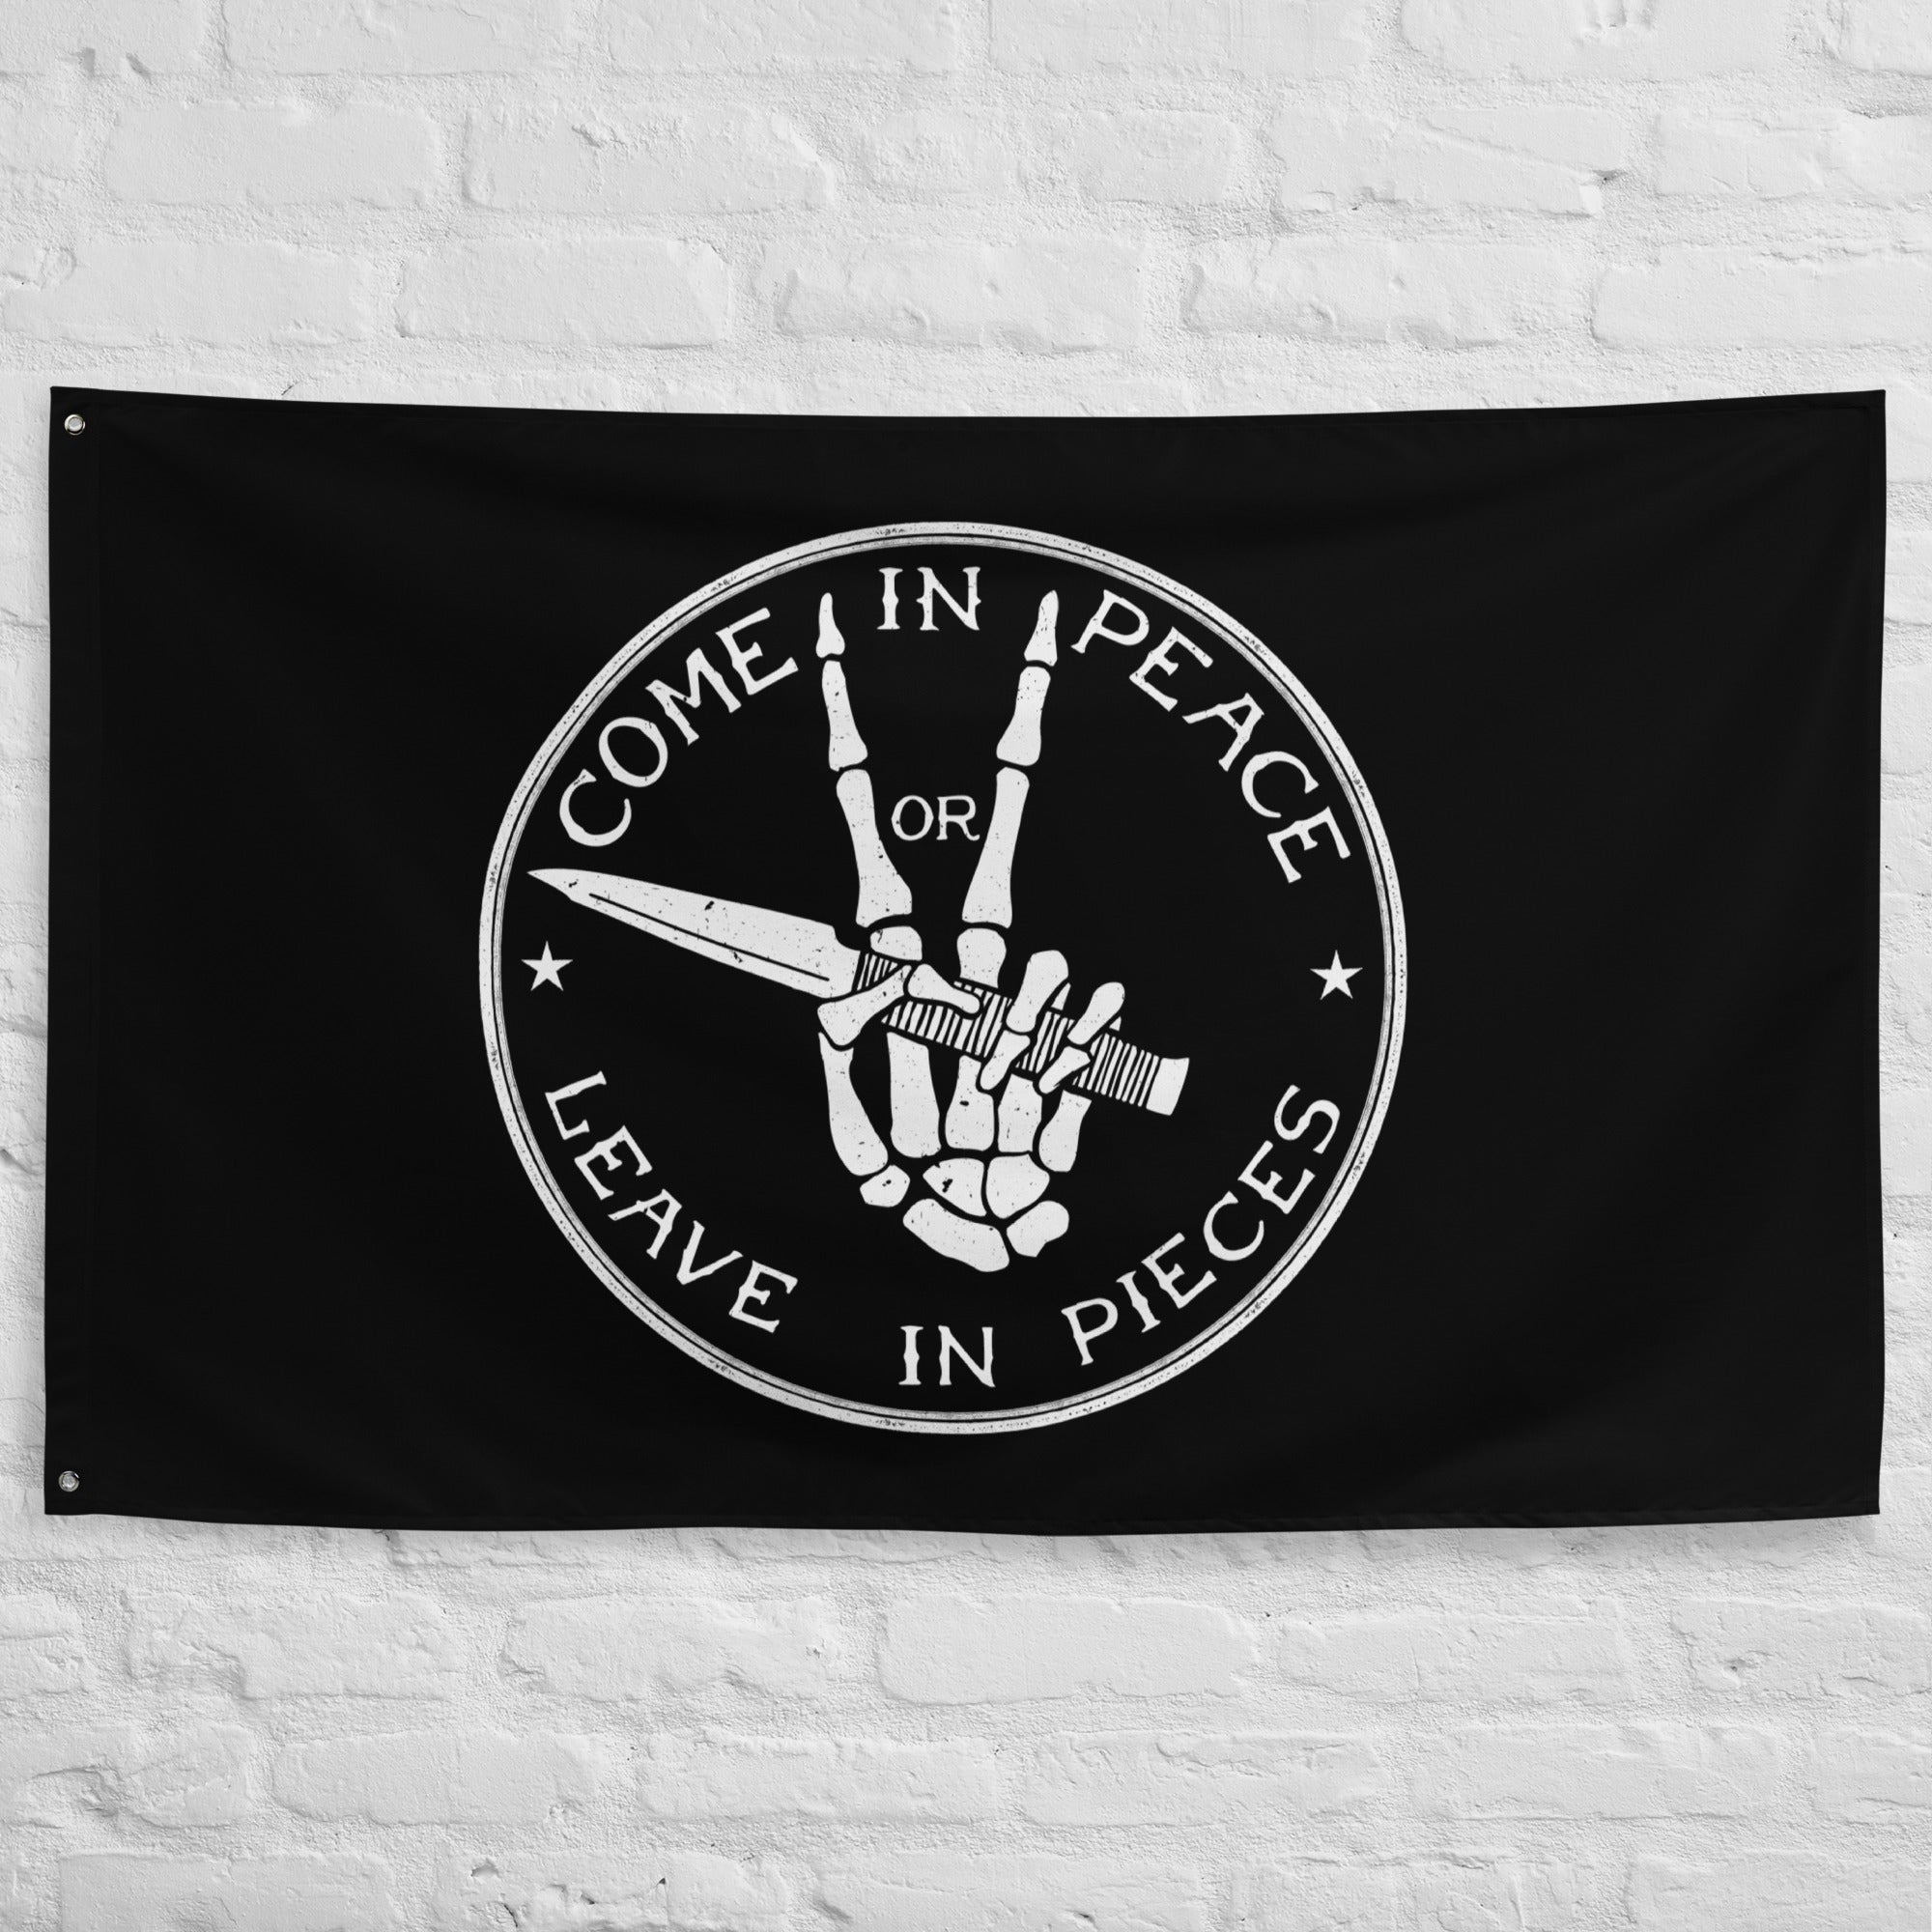 Come in Peace or Leave in Pieces Flag